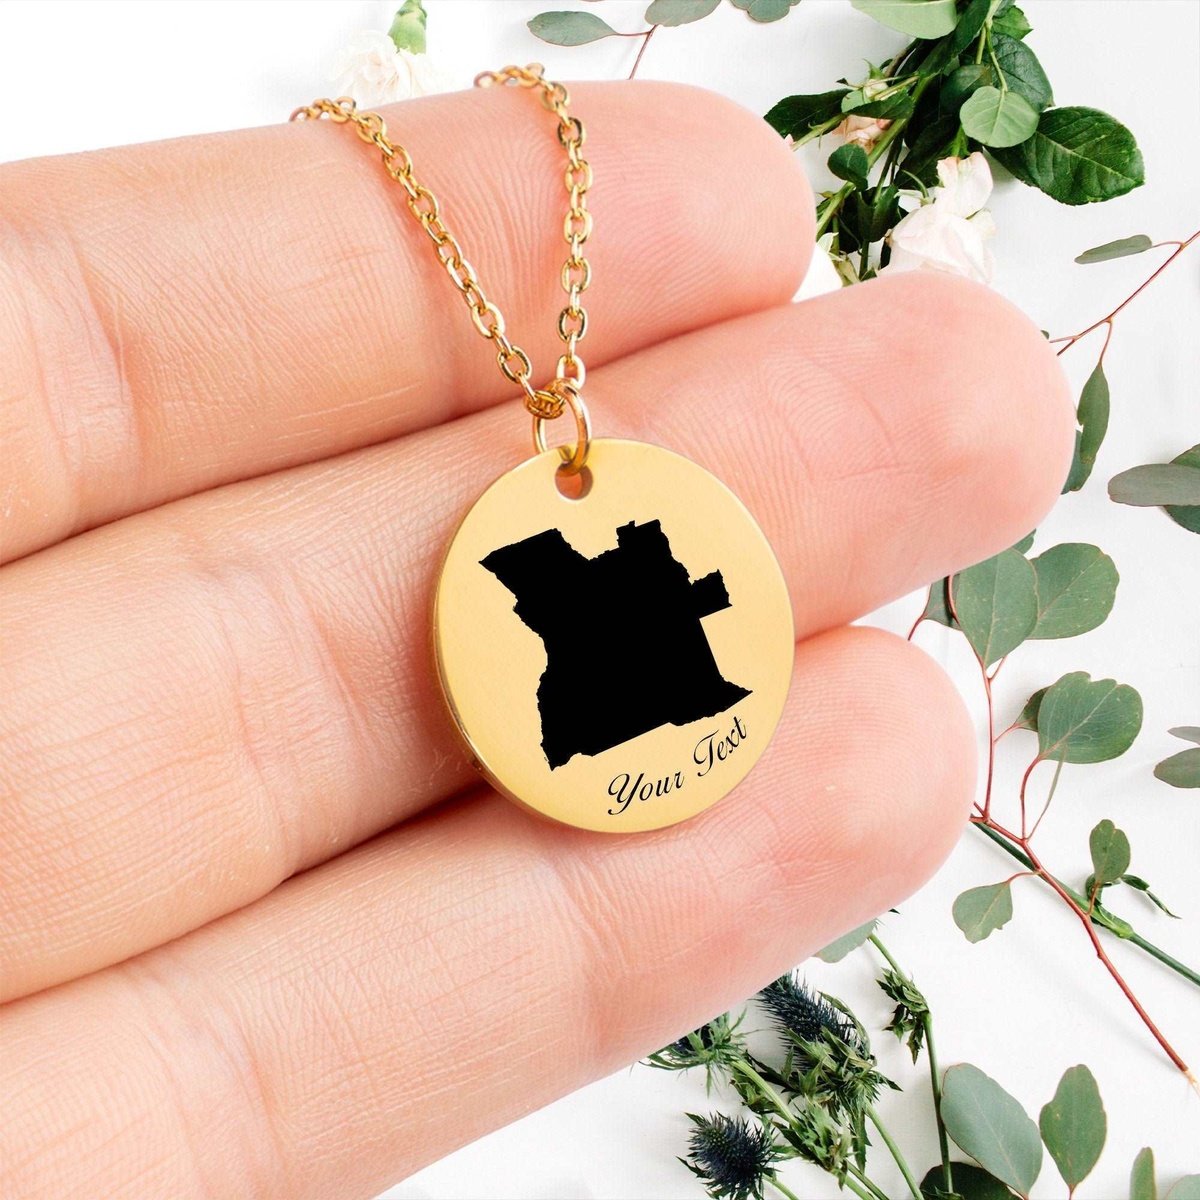 Angola Country Map Necklace, Your Name Necklace, Minimalist Necklace, Personalized Gift, Silver Necklace, Gift For Him Her